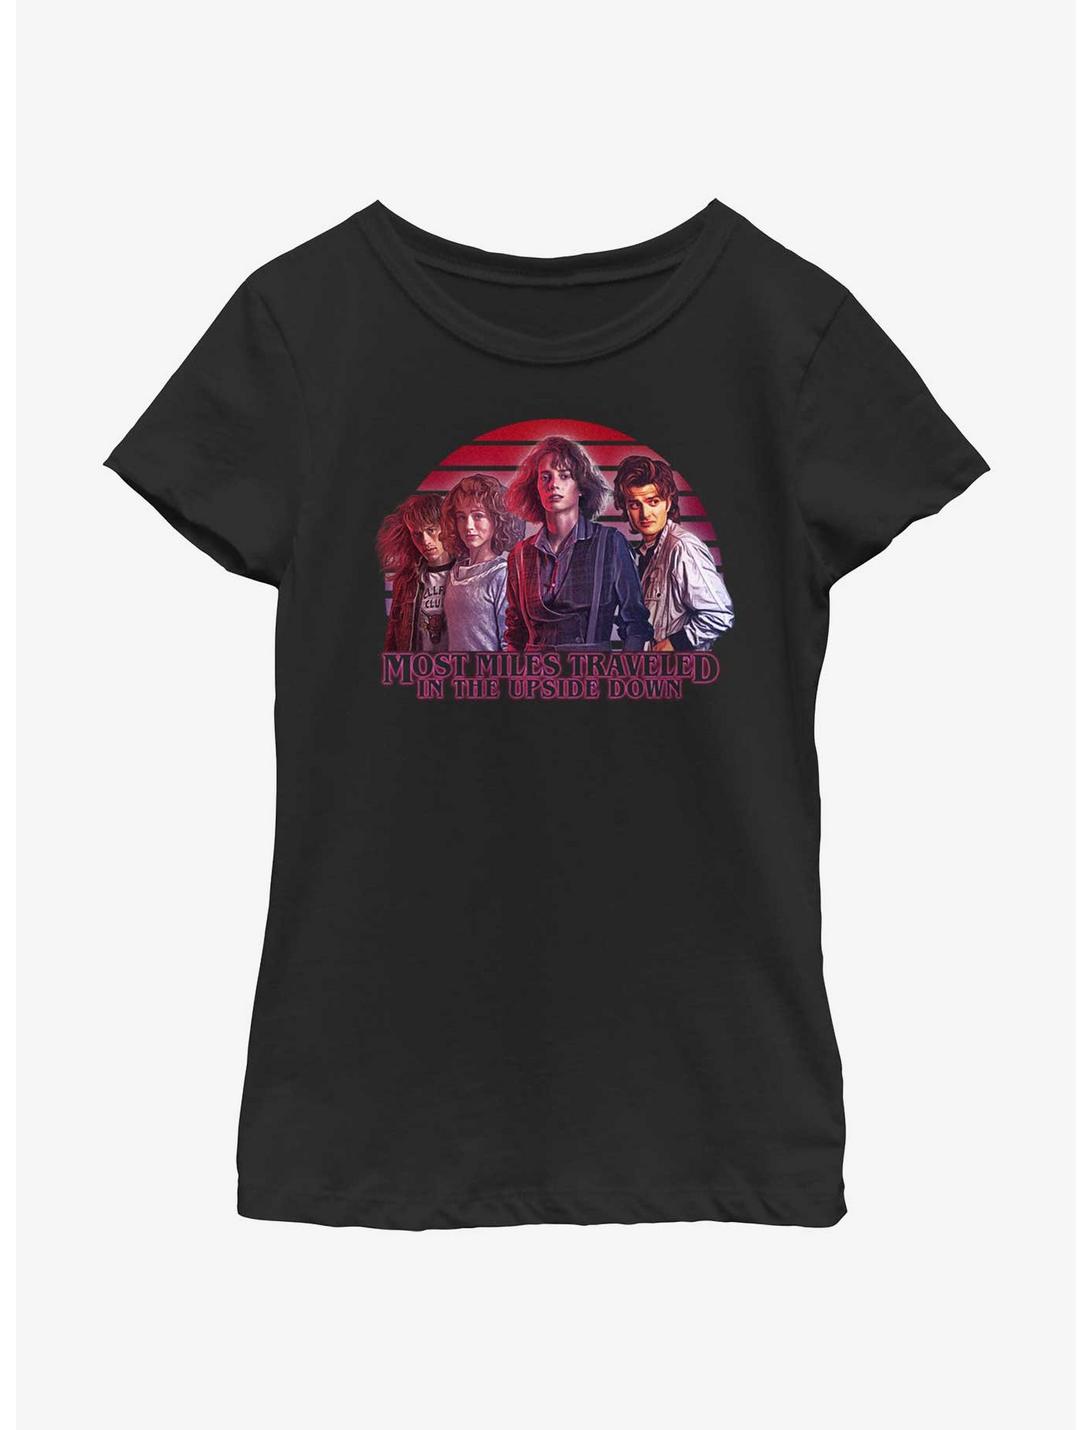 Stranger Things Most Miles Traveled In The Upside Down Youth Girls T-Shirt, BLACK, hi-res